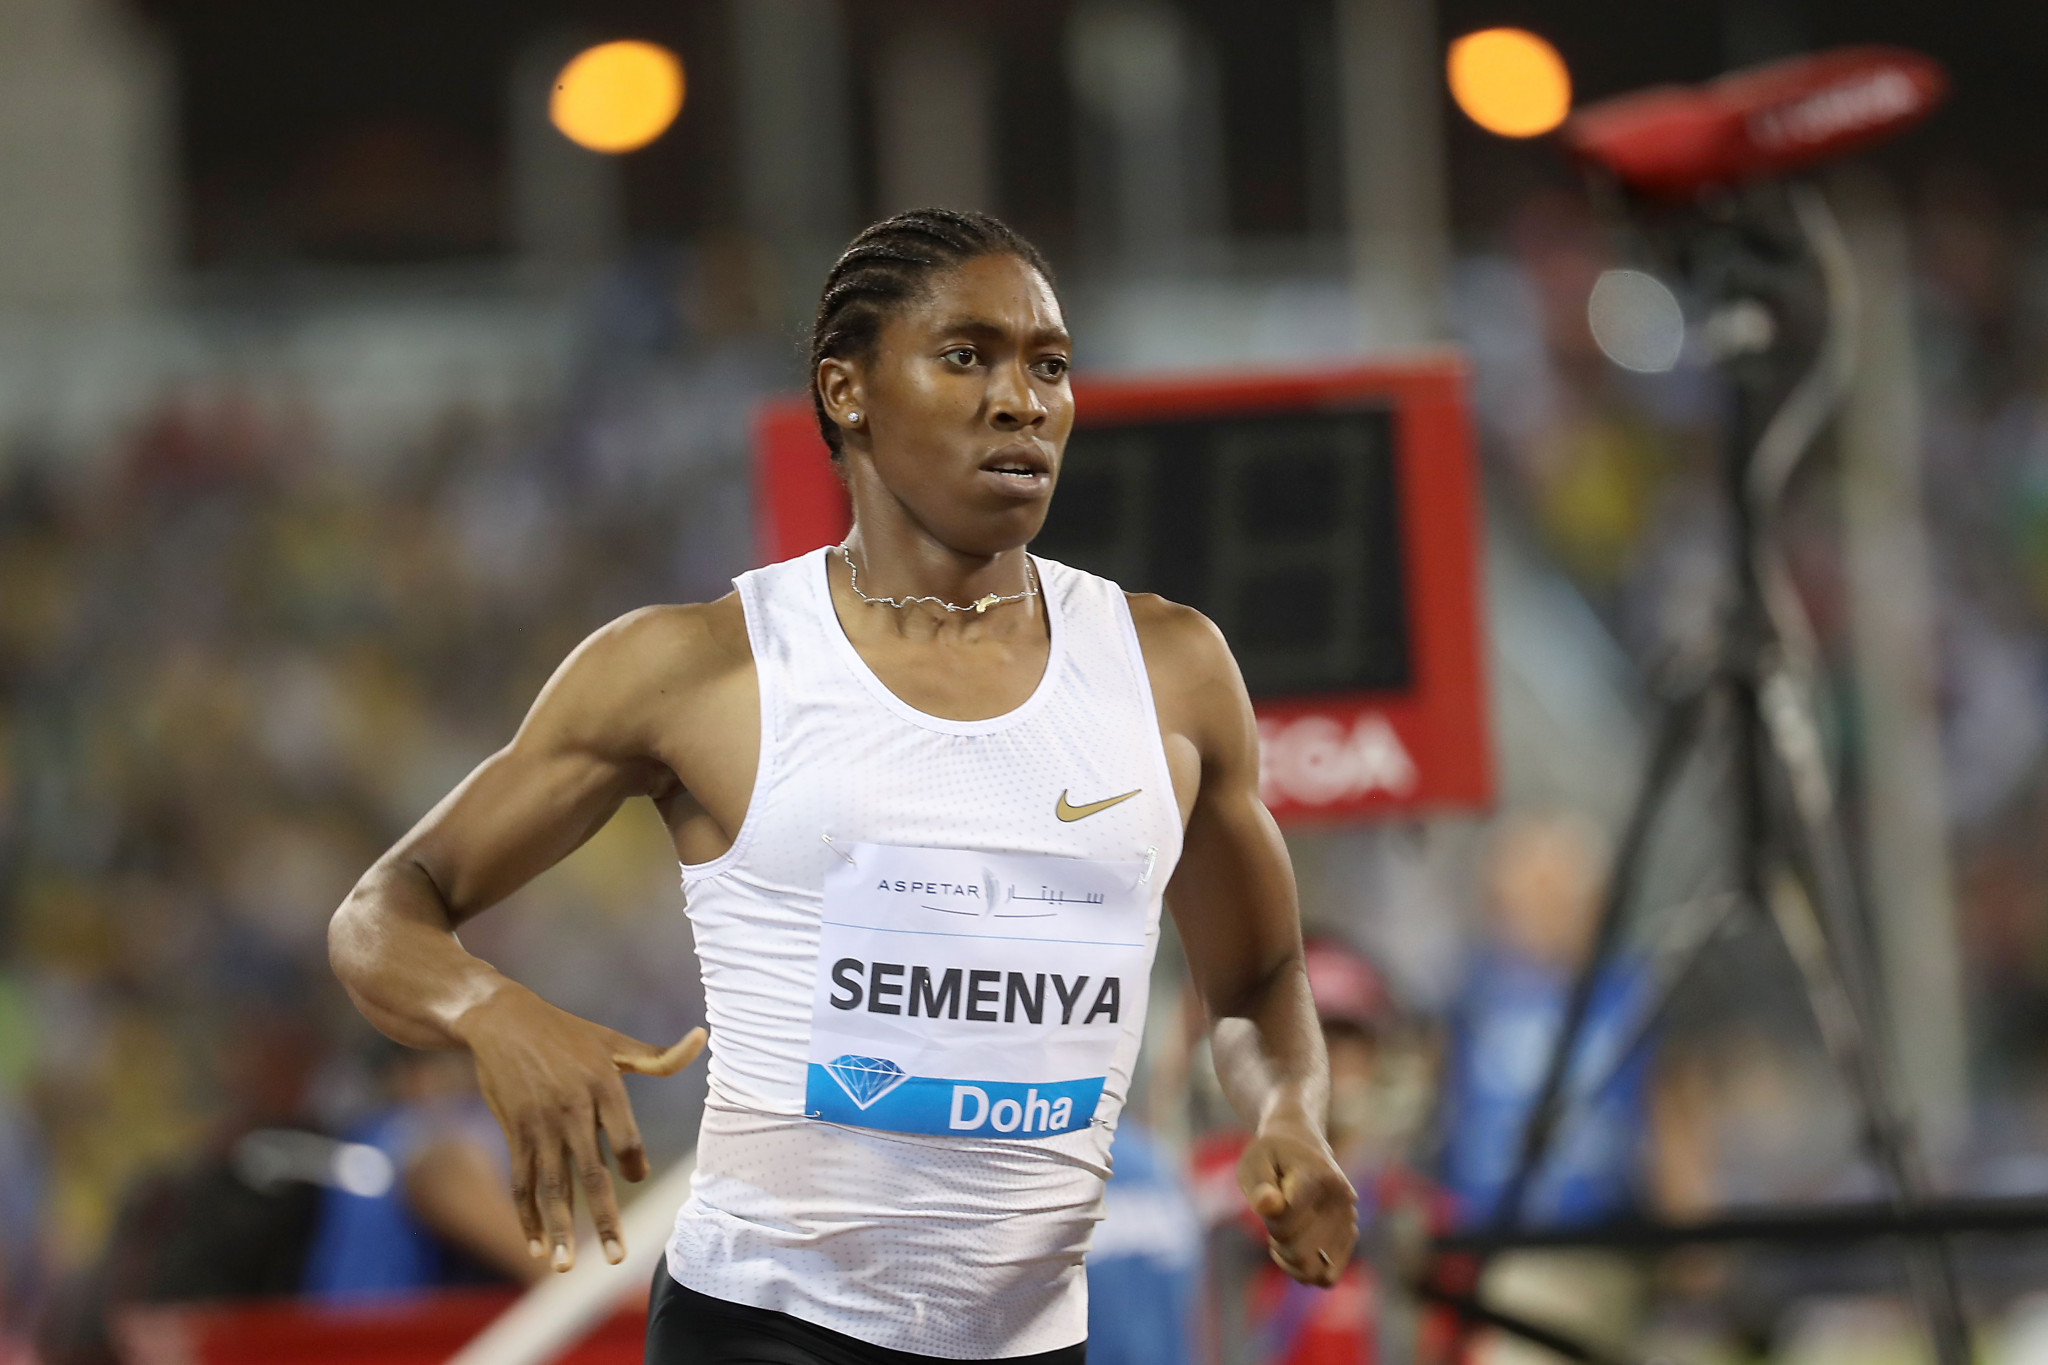 World and Olympic 800 metres champion Caster Semenya will challenge a female classification rule imposed by the IAAF at the Court of Arbitration for Sport ©Getty Images